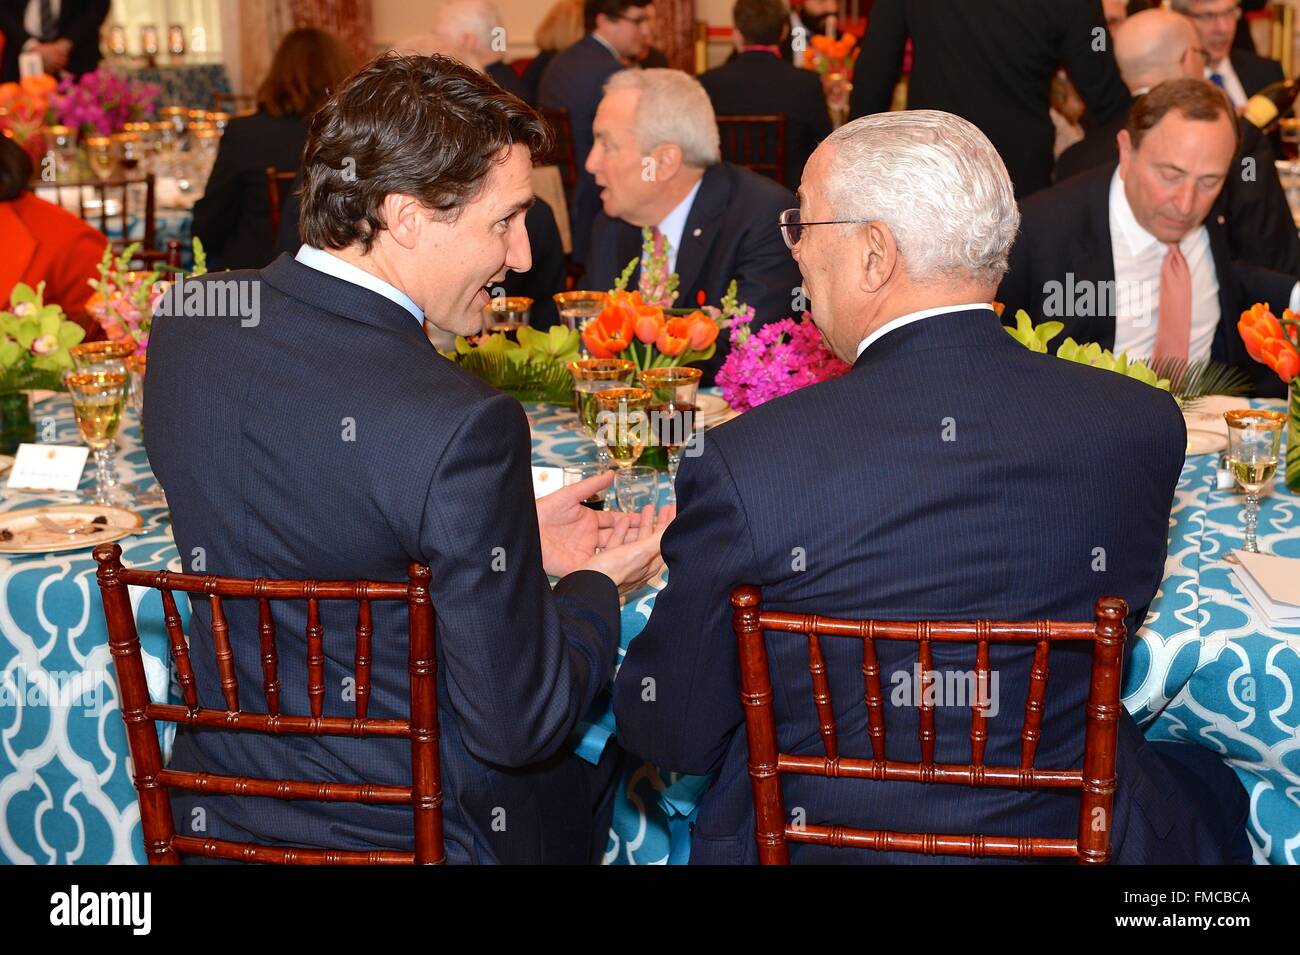 Canadian Prime Minister Justin Trudeau chats with former Secretary of State Colin Powell during a State Luncheon in honor of Trudeau March 10, 2016 in Washington, DC. This is the first state visit by a Canadian Prime Minister in 20-years. Stock Photo